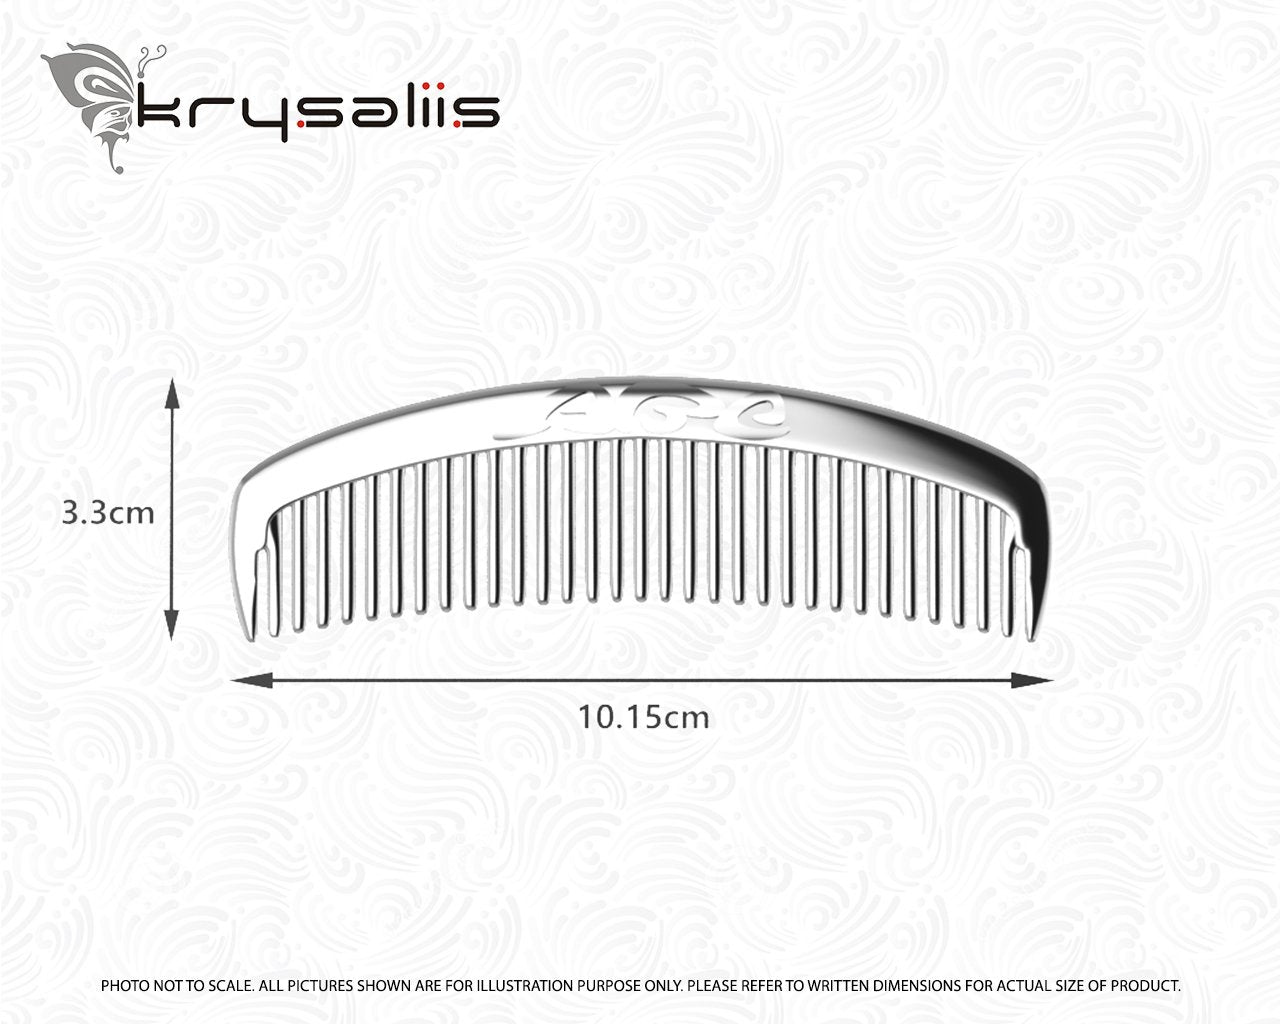 ABC Sterling Silver Baby Comb by Krysaliis - All Silver Gifts